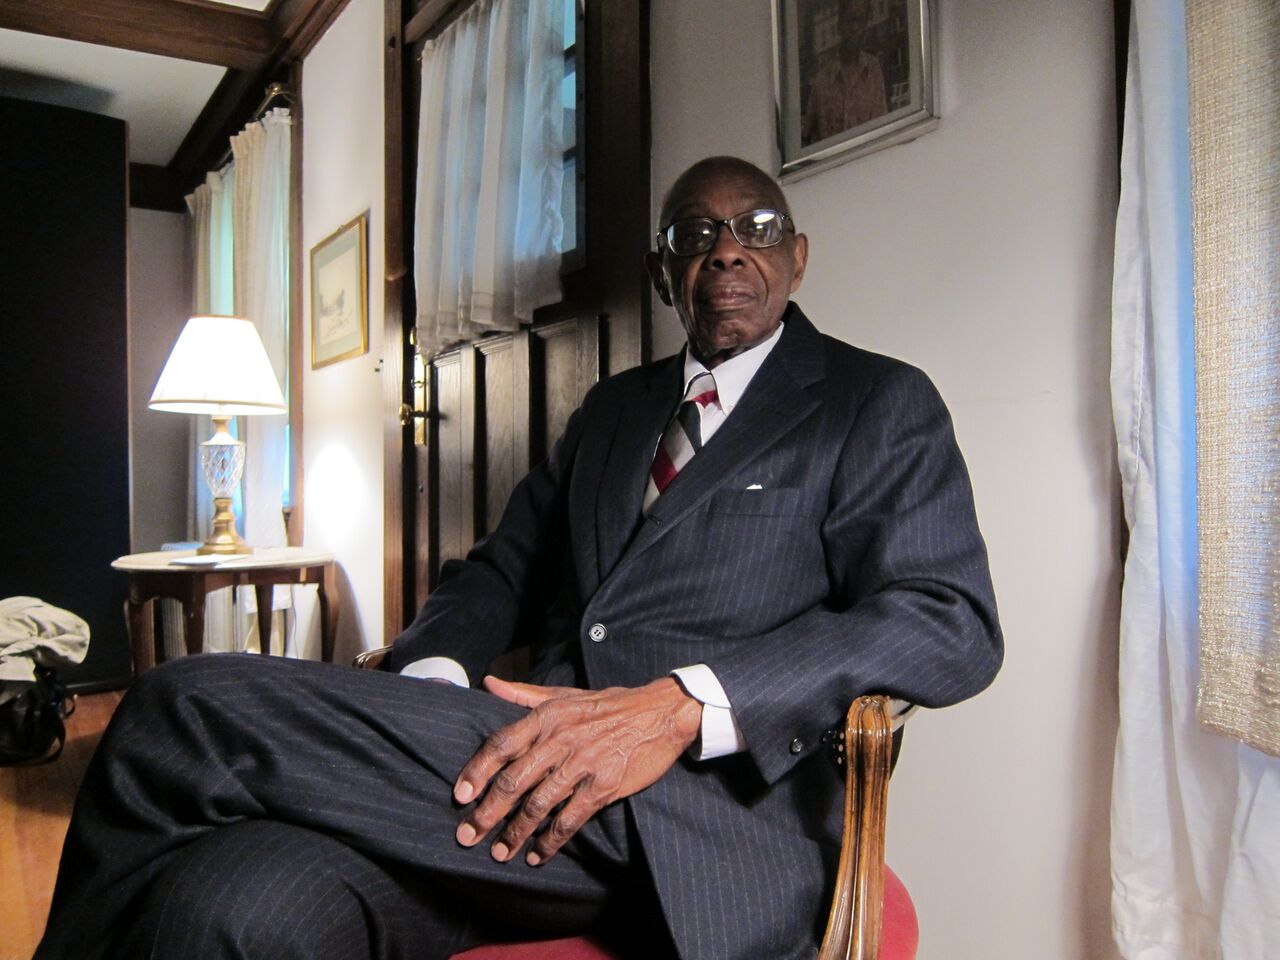 George Walker sitting in a chair in his living room.